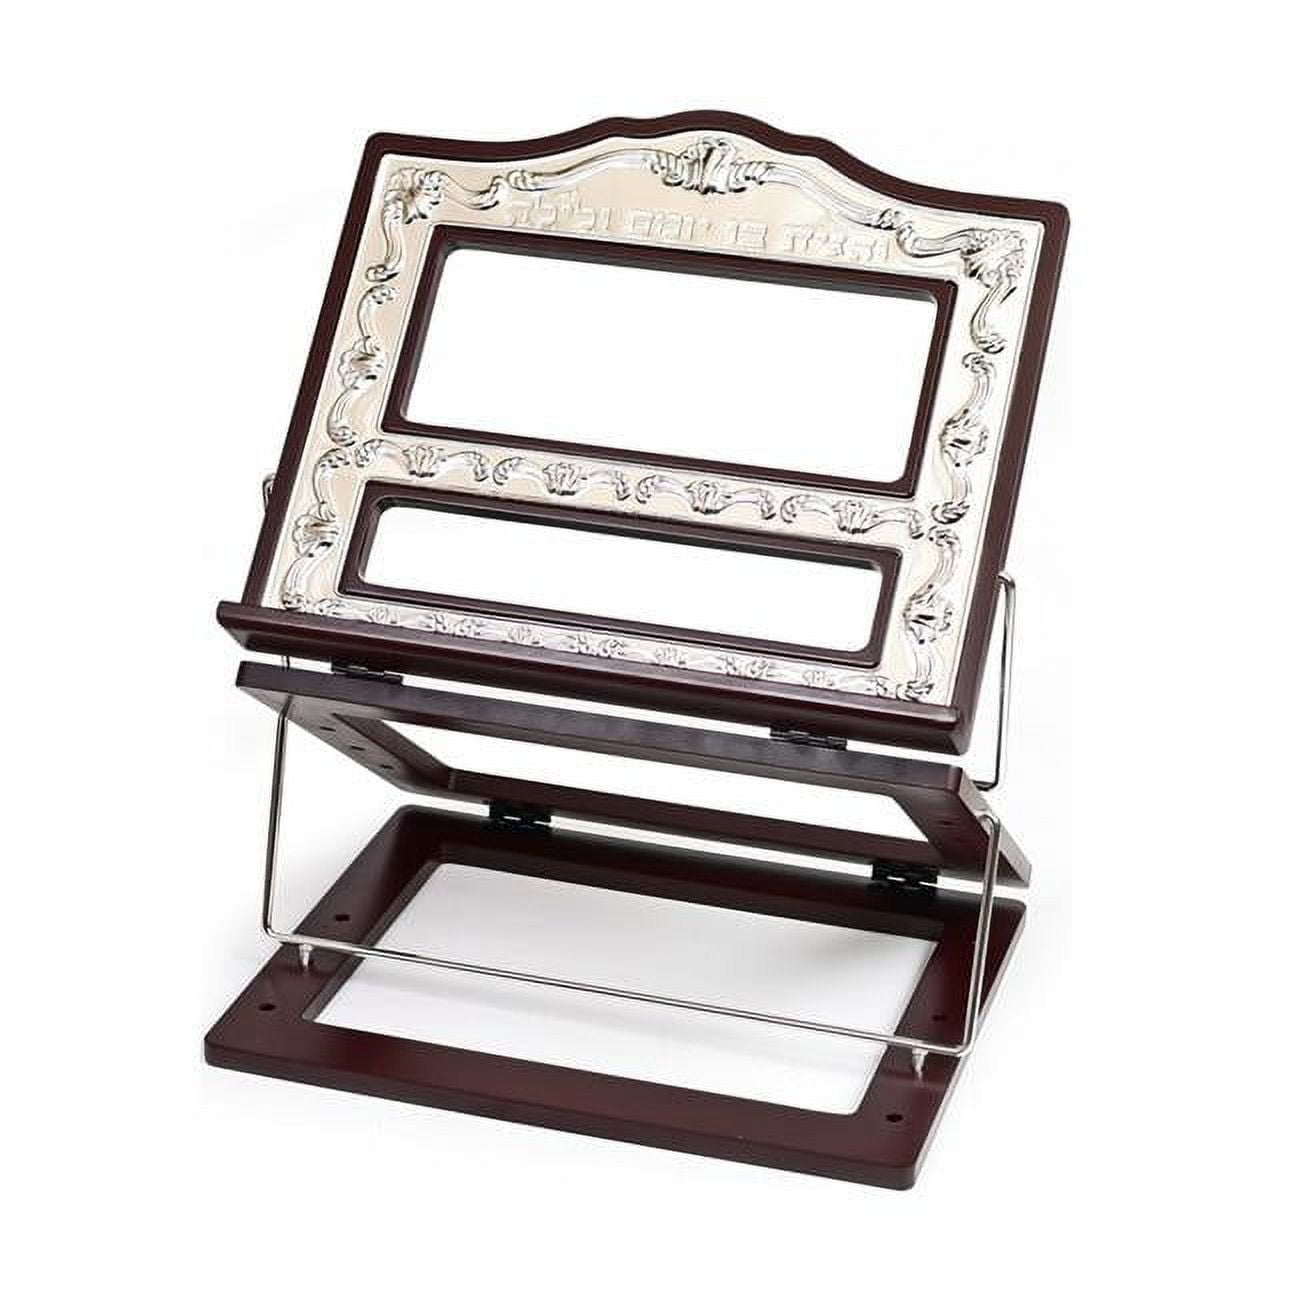 Picture of Novell Collection X1775 13.5 x 11.5 in. Wood & Silver Plated 2 Positions Book Stand